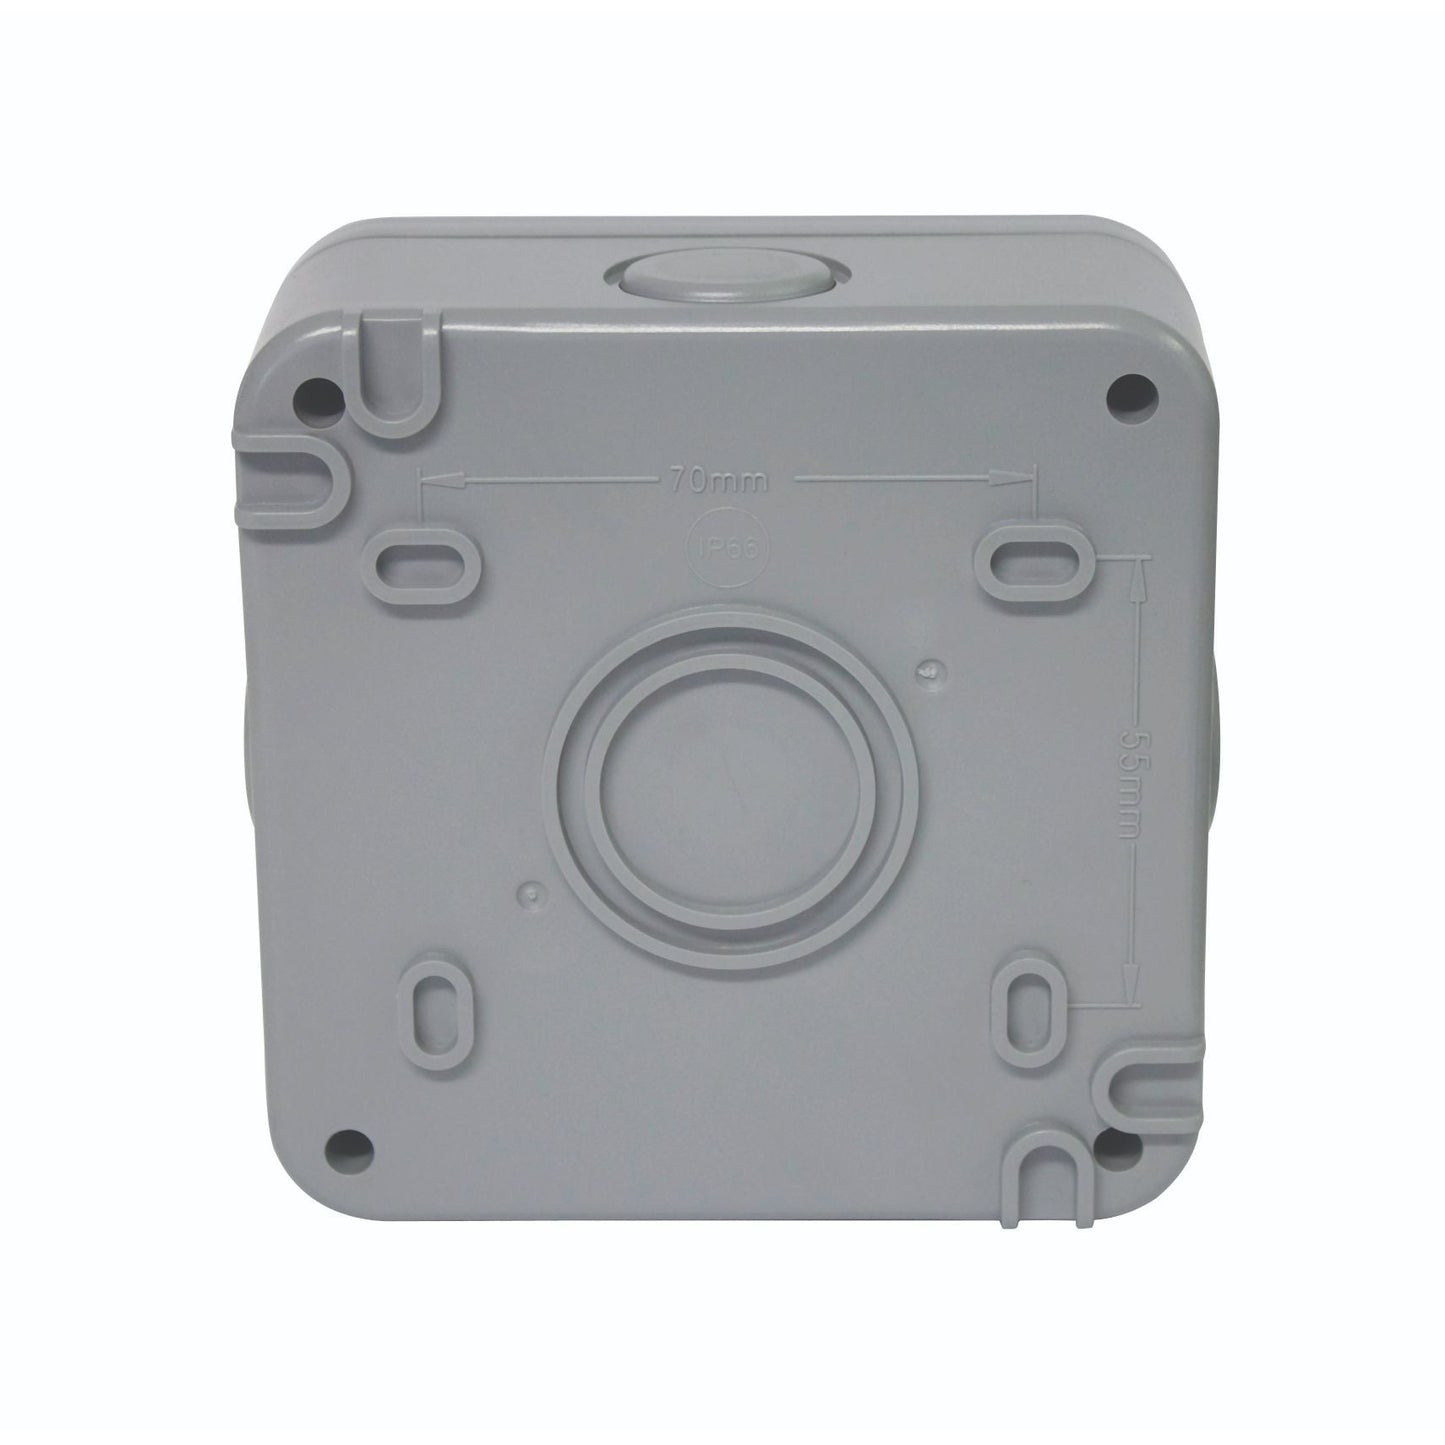 IP66 HEAVY DUTY OUTDOOR SQUARE JUNCTION BOX